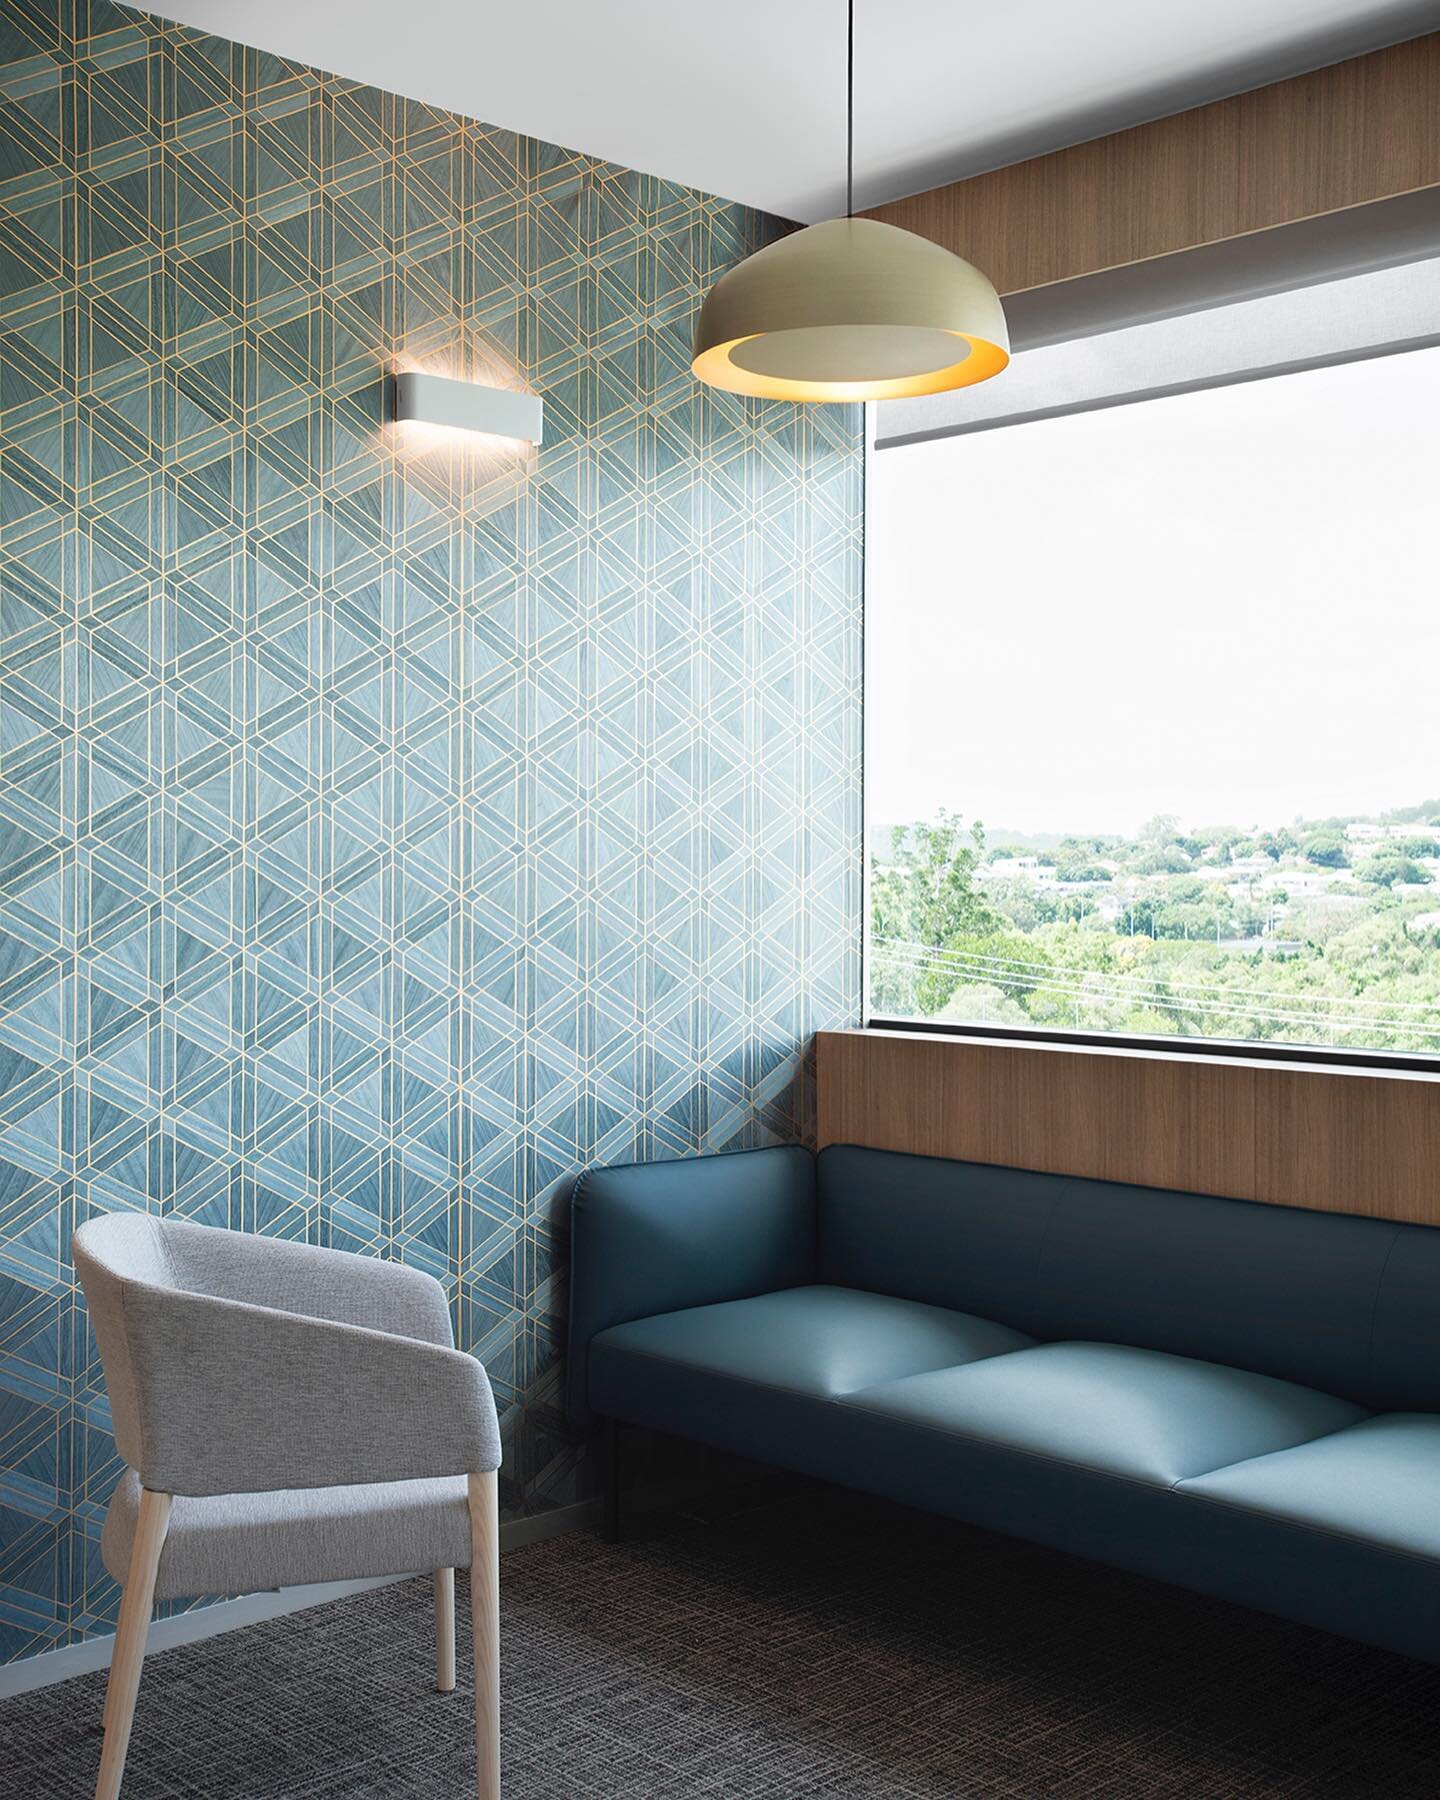 It&rsquo;s Friday! So we&rsquo;re back to posting inspiration for relaxation! Here&rsquo;s the waiting room in Dr. Yang&rsquo;s rooms. Providing a calm space for patients is critical for comfort and health, and it plays an important role in ensuring 